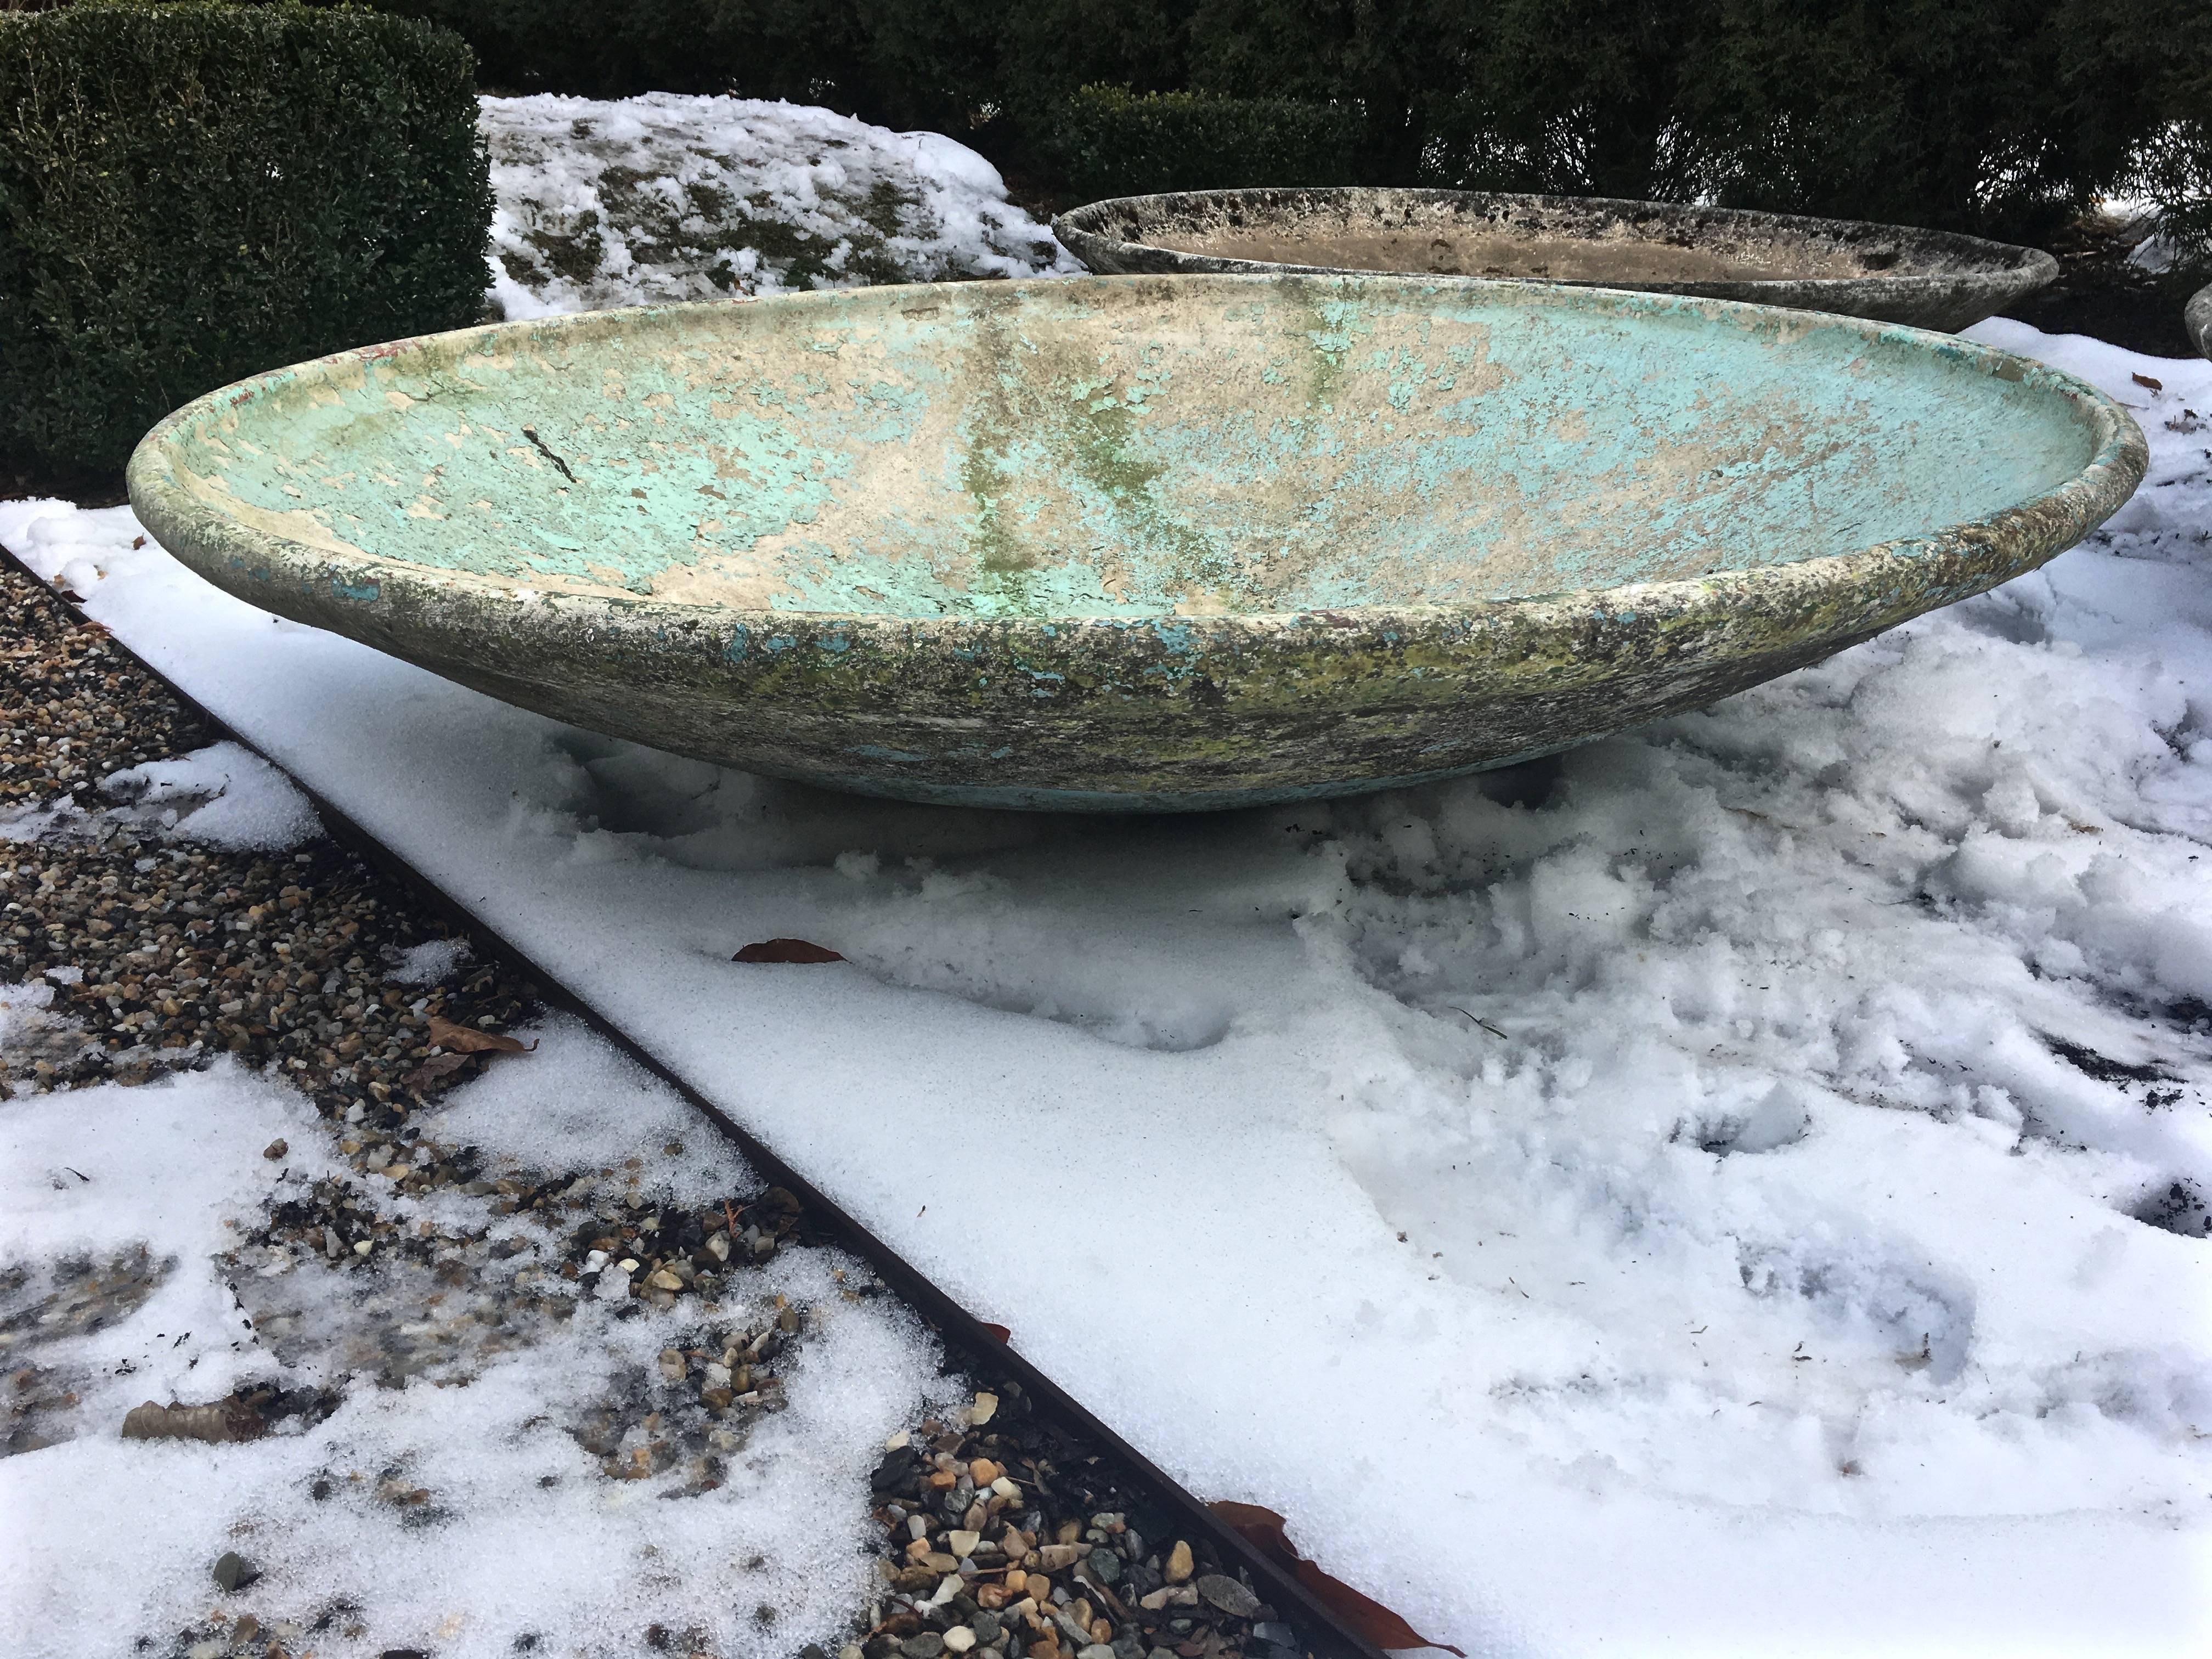 We were fortunate enough to be able to score three of these enormous saucer planters, all in wonderful condition and with beautifully aged patina. Two have sold and only the one with chippy aqua paint remains. Numbered (and so an authenticated Willy